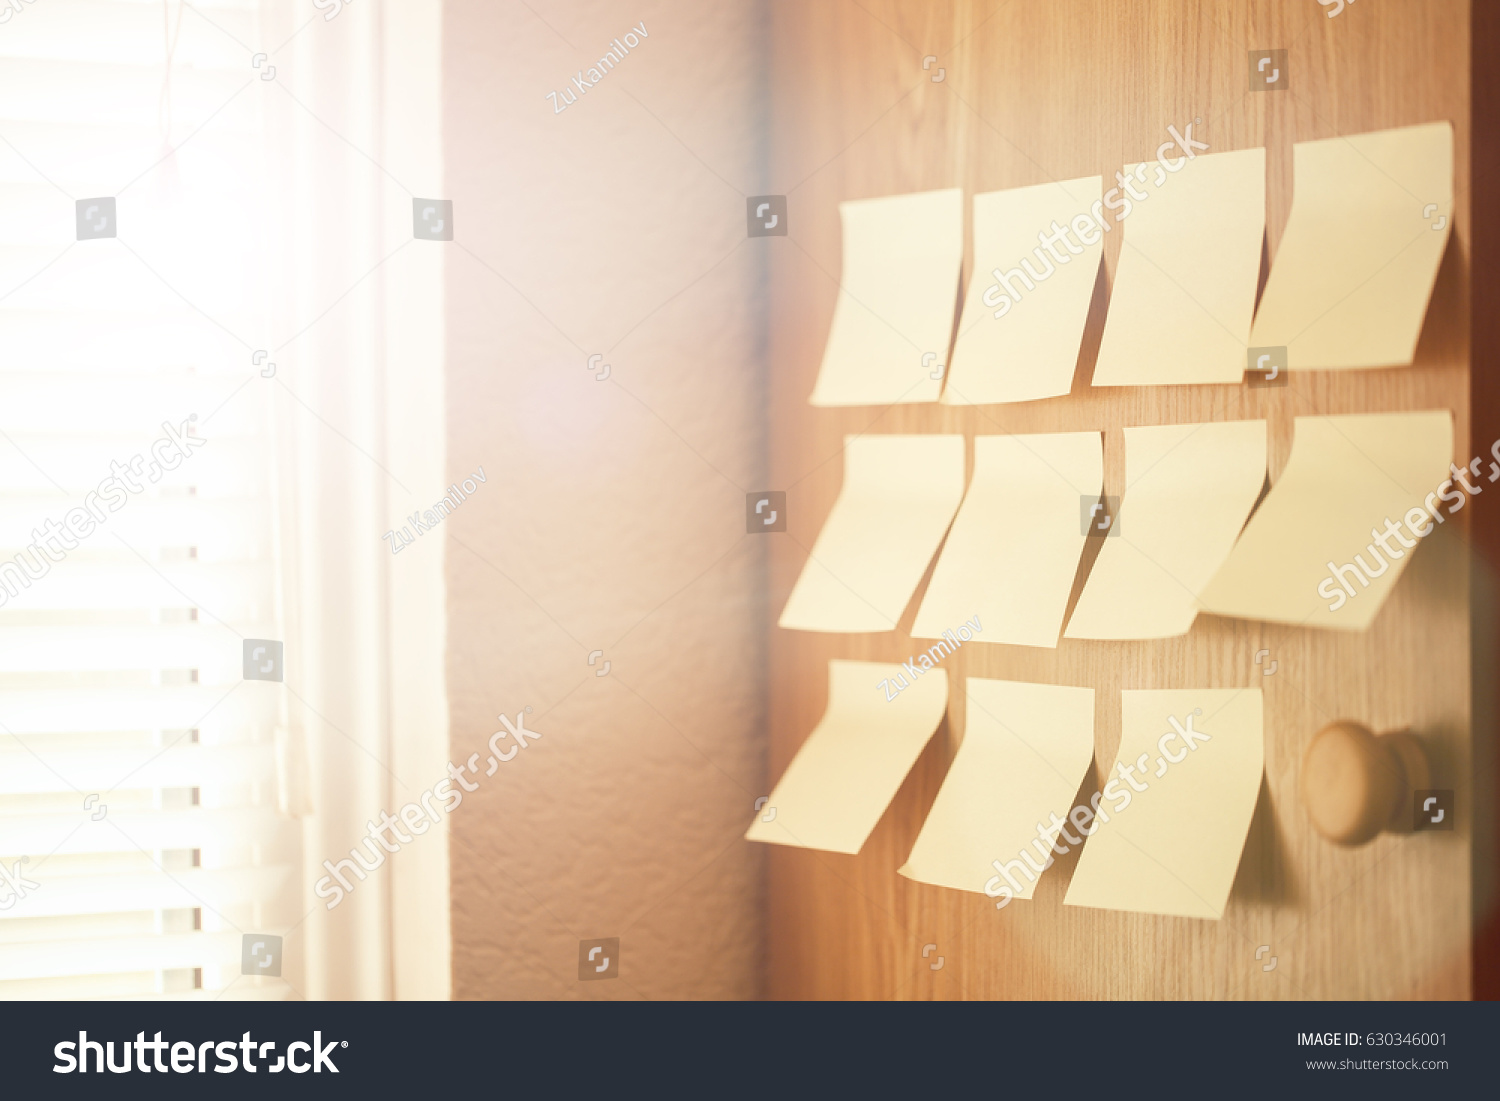 Yellow Memo Sticky Notes On Wooden Stock Photo Edit Now 630346001